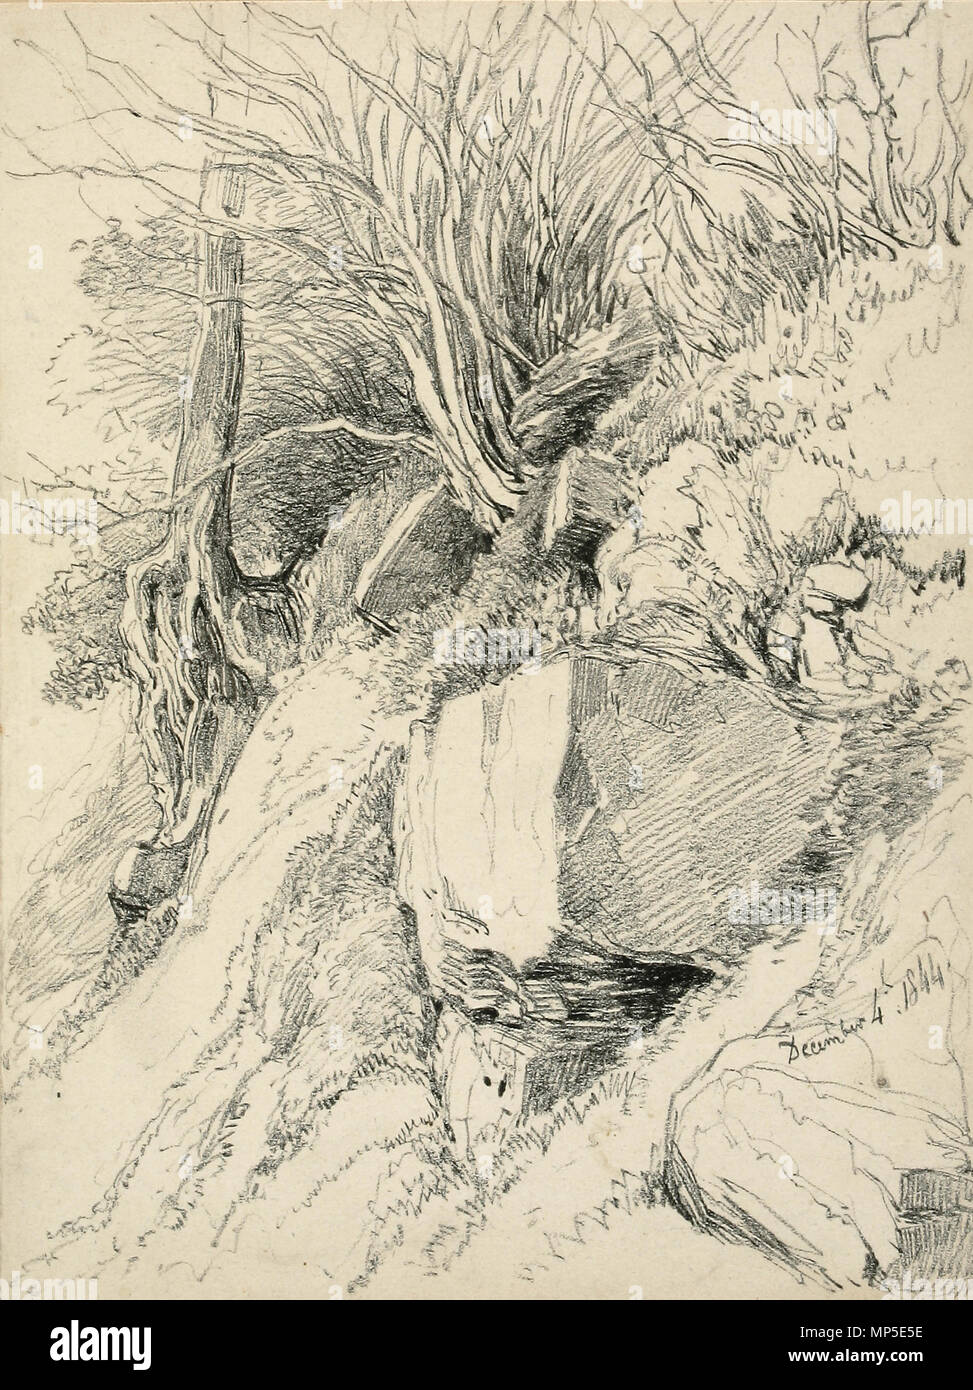 . English: Steep Bank, Rocks and Trees Pencil on paper; 184 x 243mm Inscr. br.: December 4th 1844 Accession: BIRSA:2007X.529 From the Lines family sketchbook, in the collection of the Royal Birmingham Society of Artists, Birmingham, England. See Rediscovering the Lines Family - Exhibition catalogue - 2009. 4 December 1844. Unattributed member of the Lines family 812 Lines family sketchbook - Disc1 037 - Steep Bank, Rocks and Trees Stock Photo